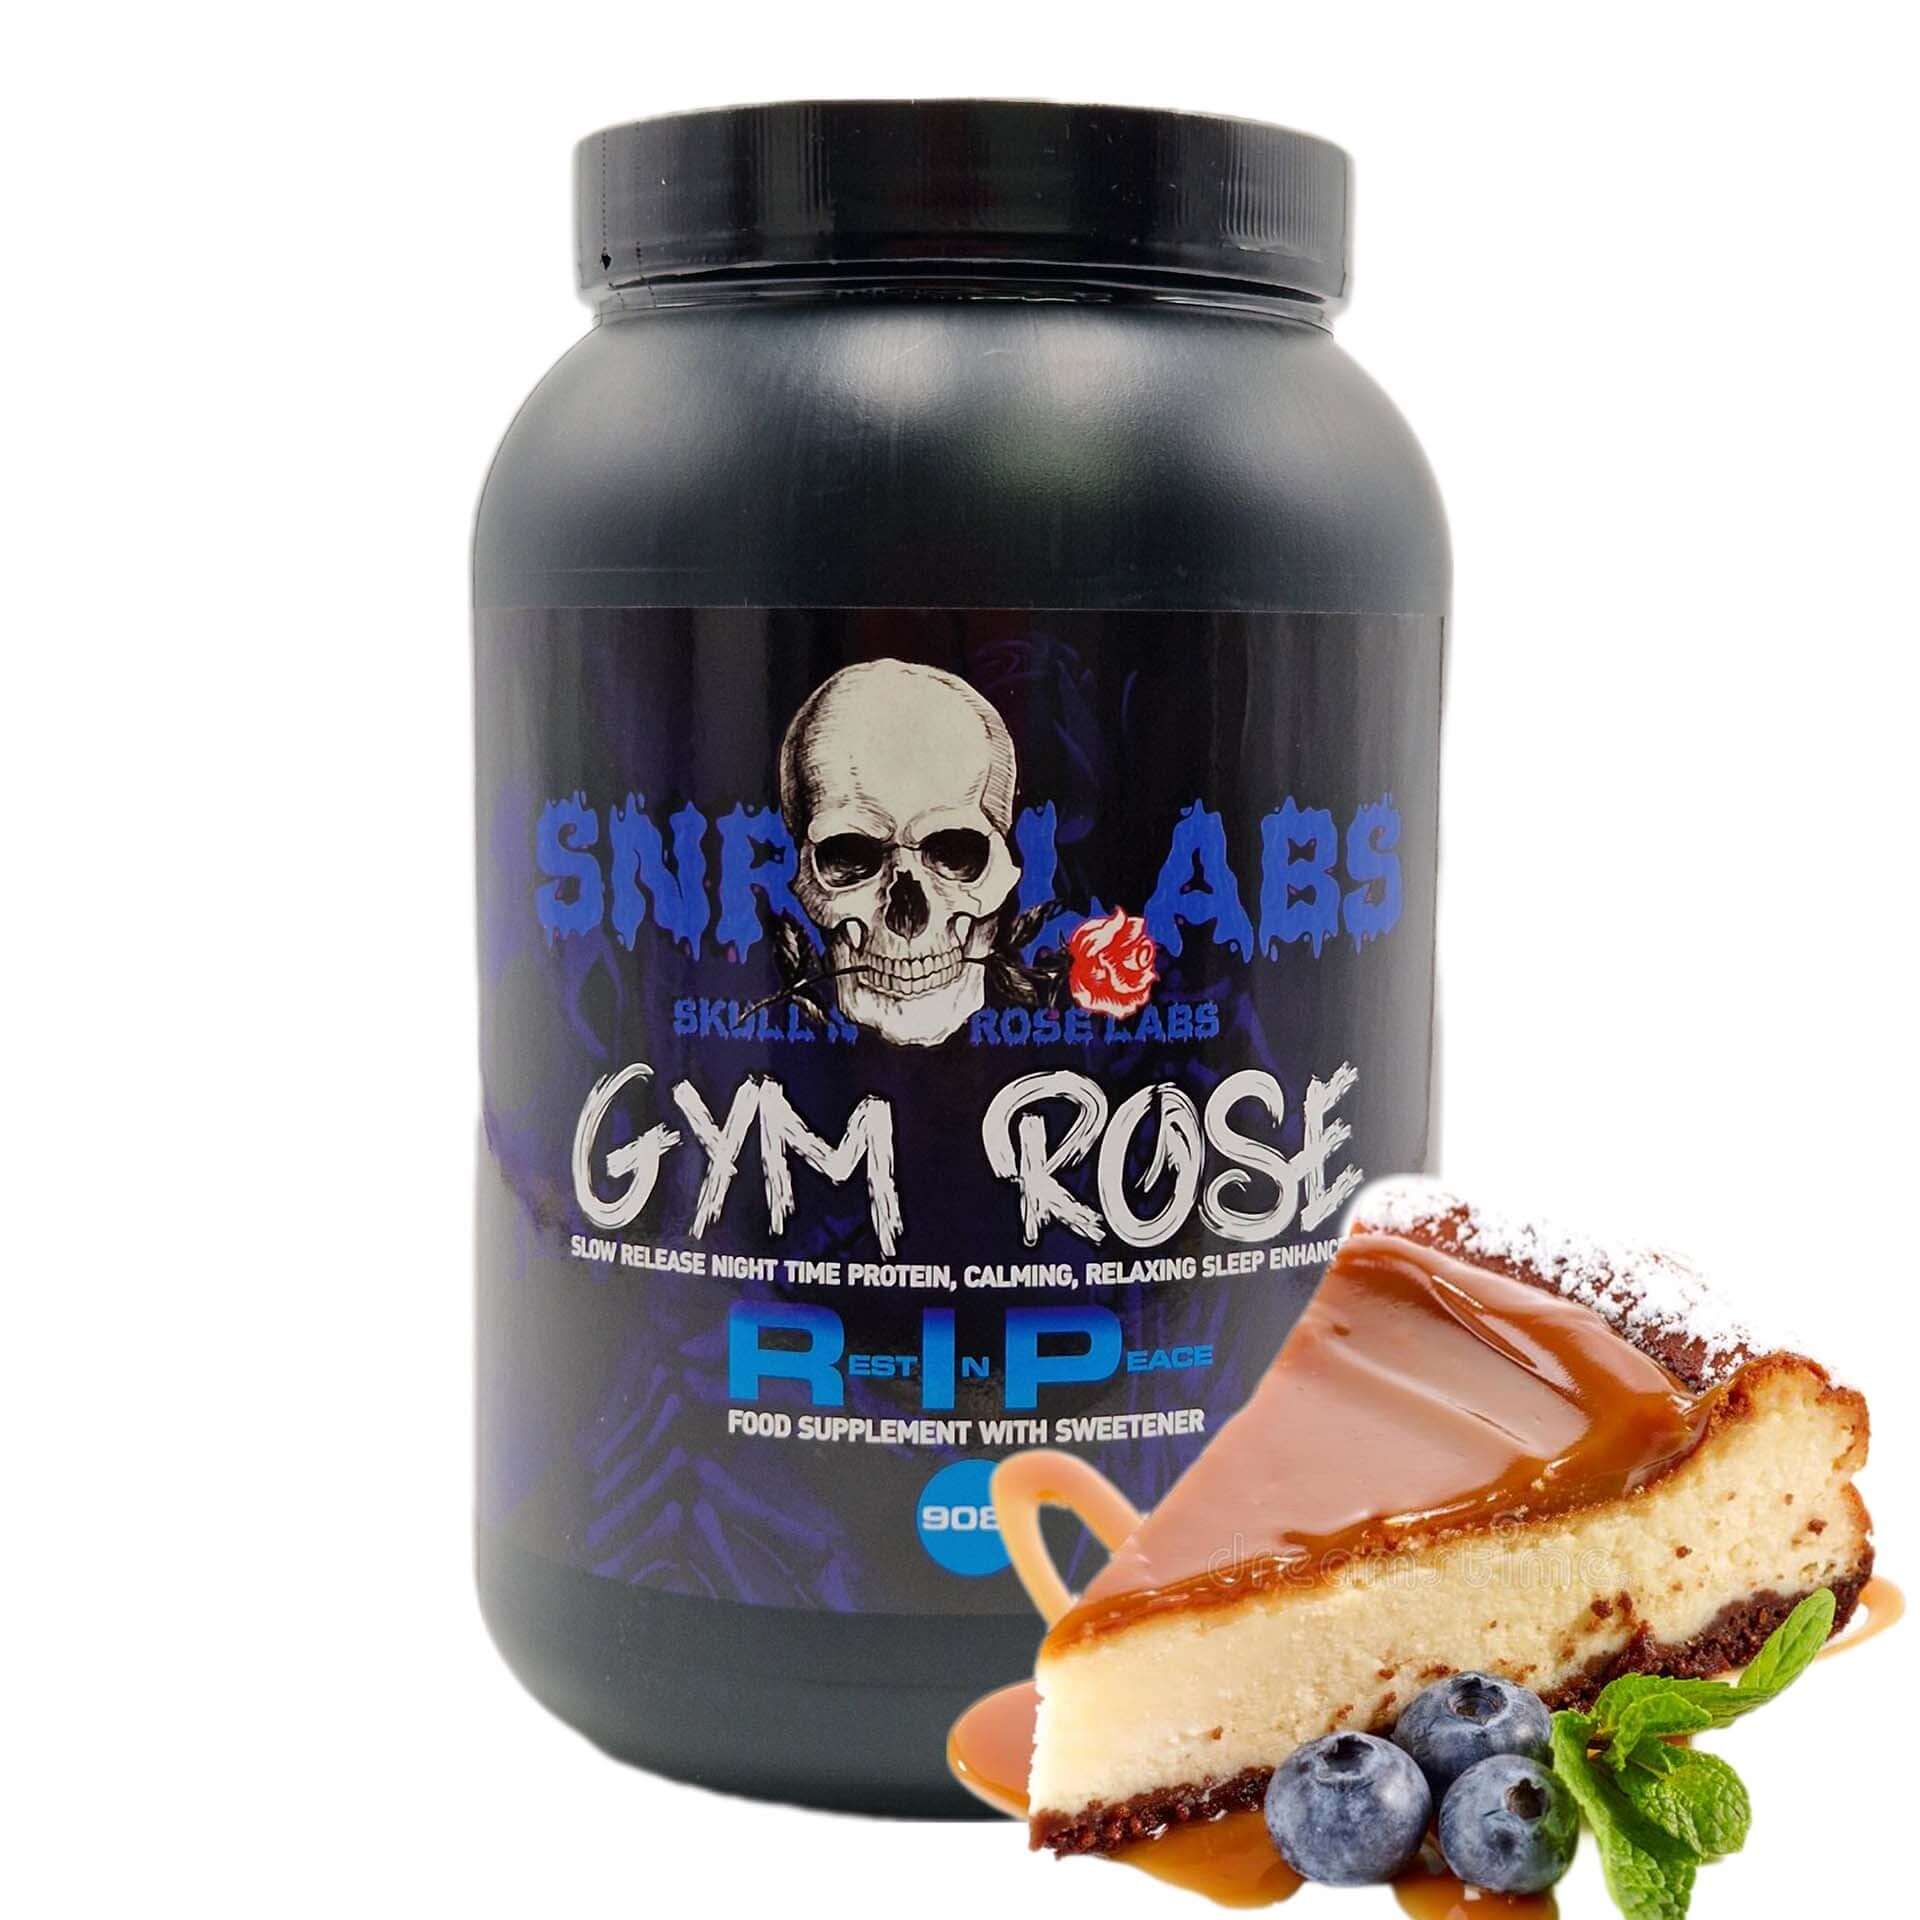 SNRLabs Gym Rose RIP night time protein Blueberry Caramel